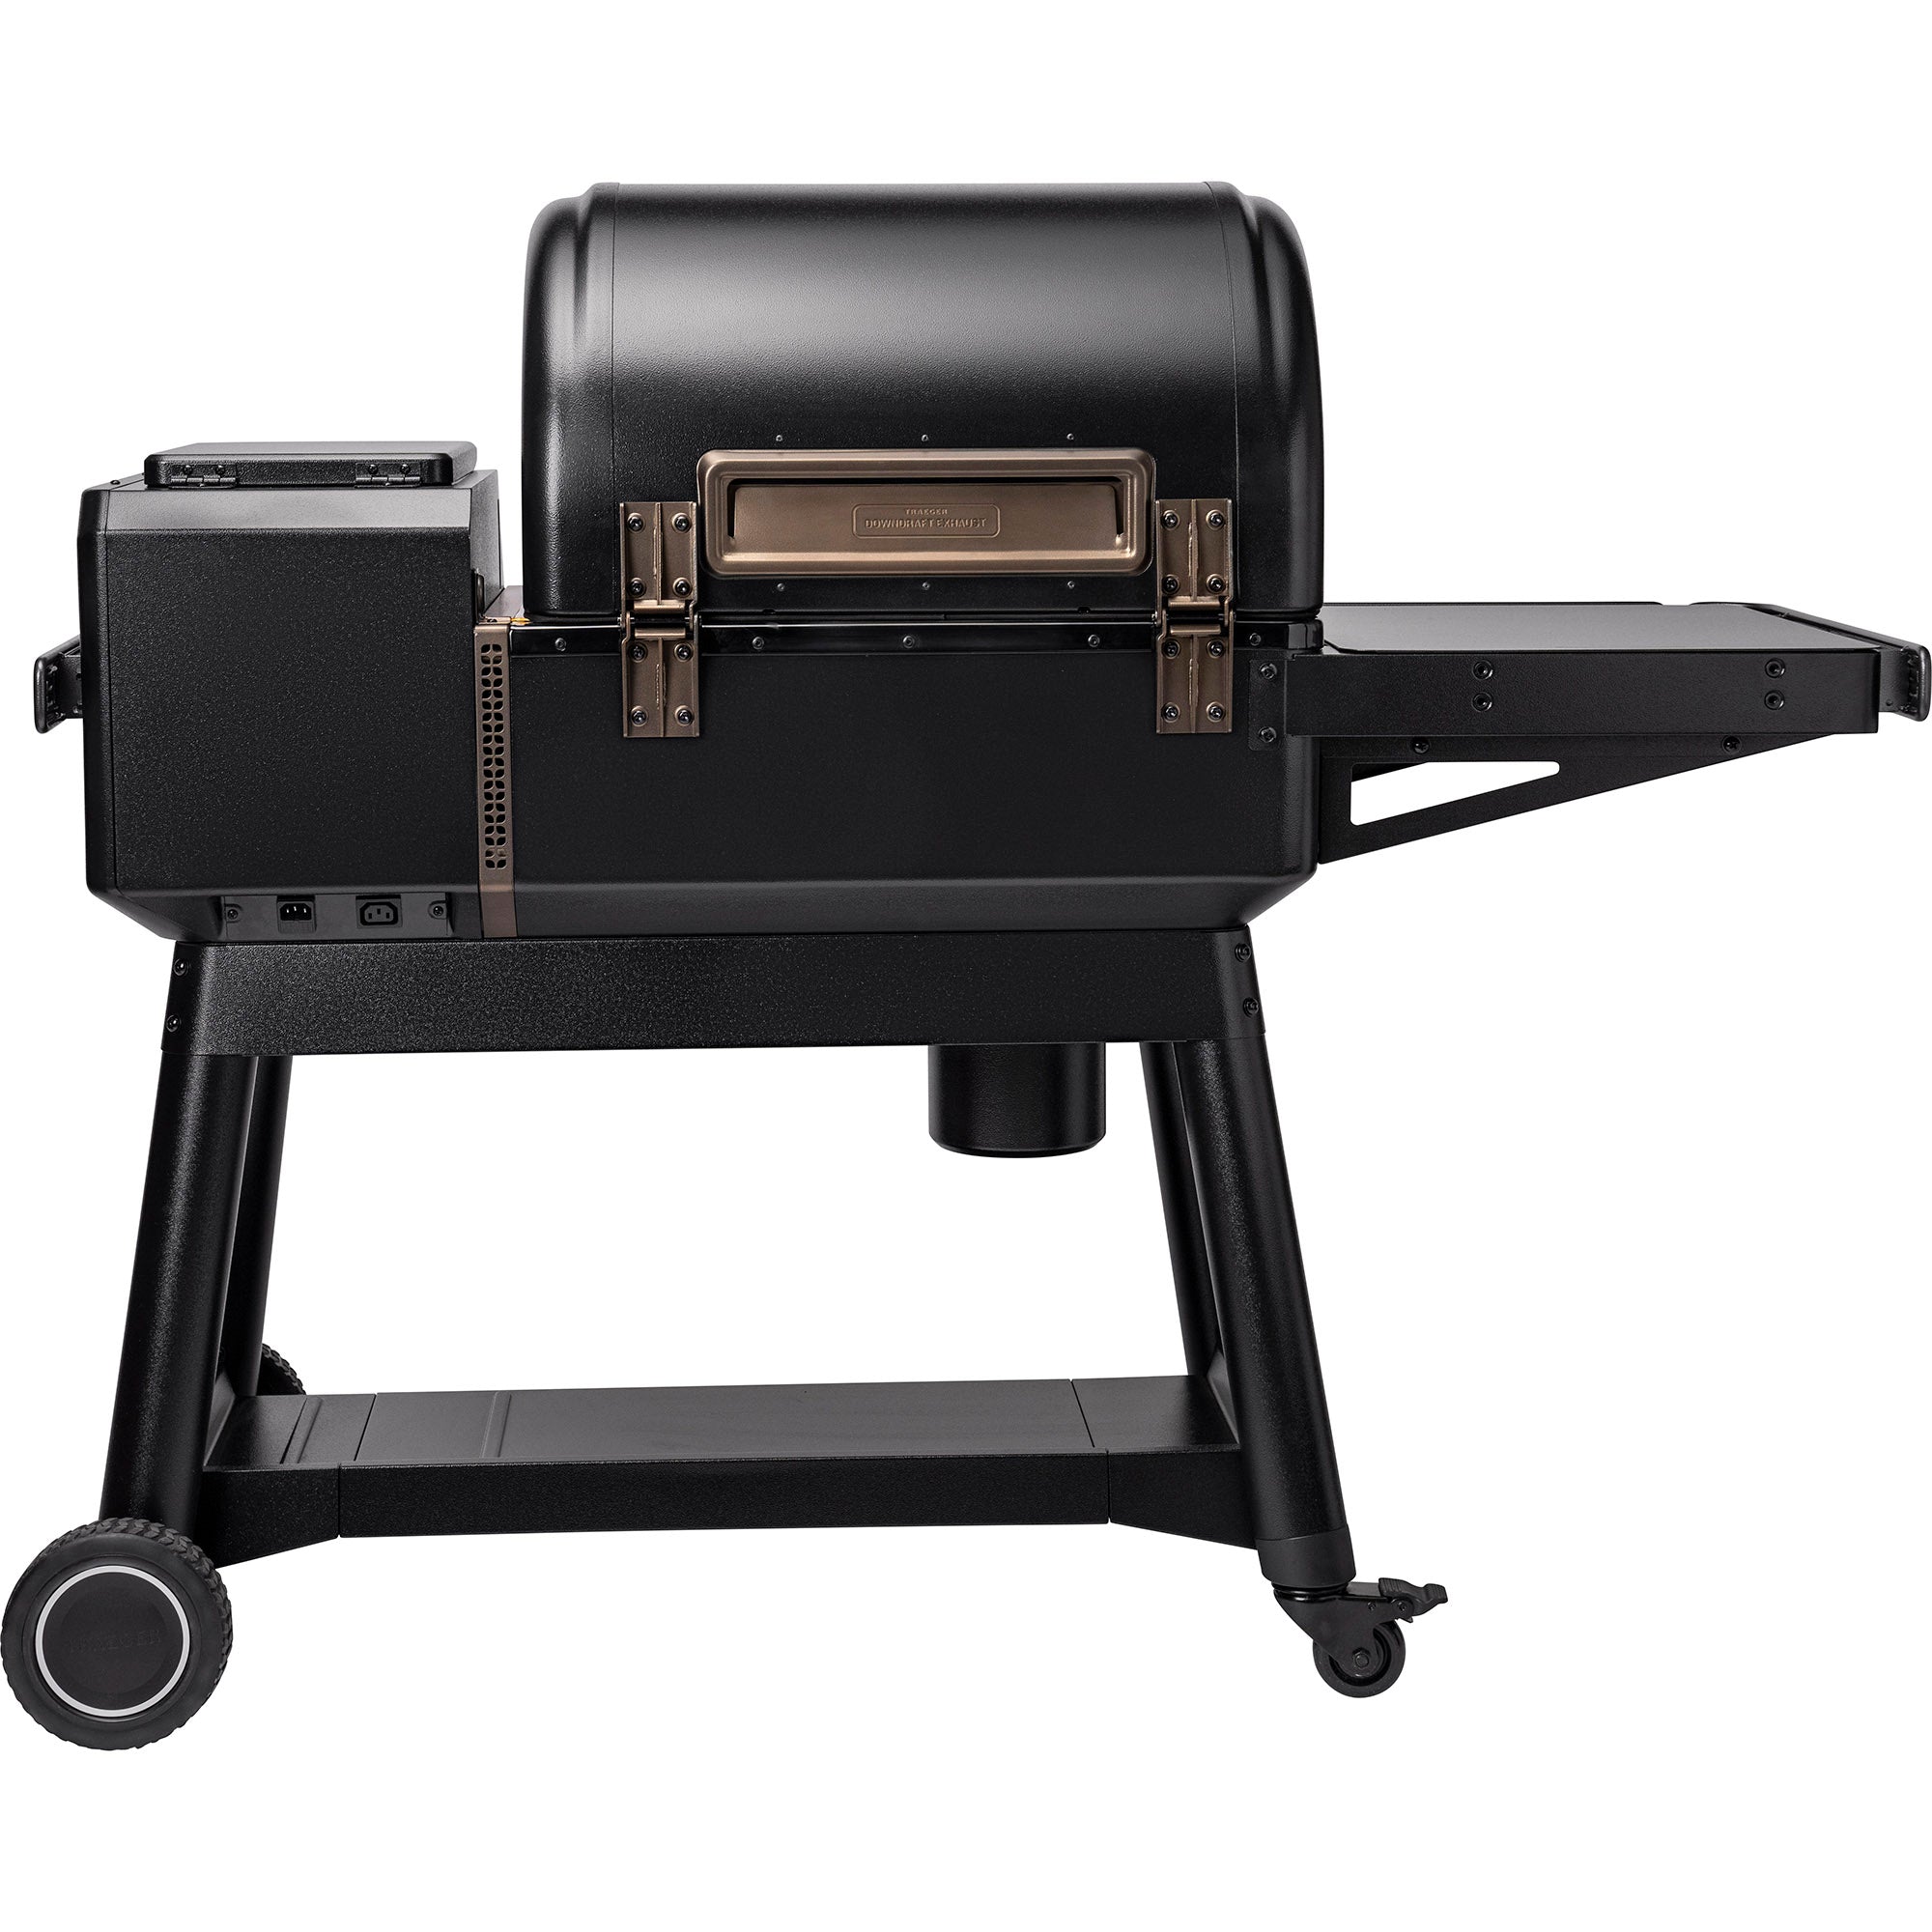 THE ALL NEW TRAEGER IRONWOOD